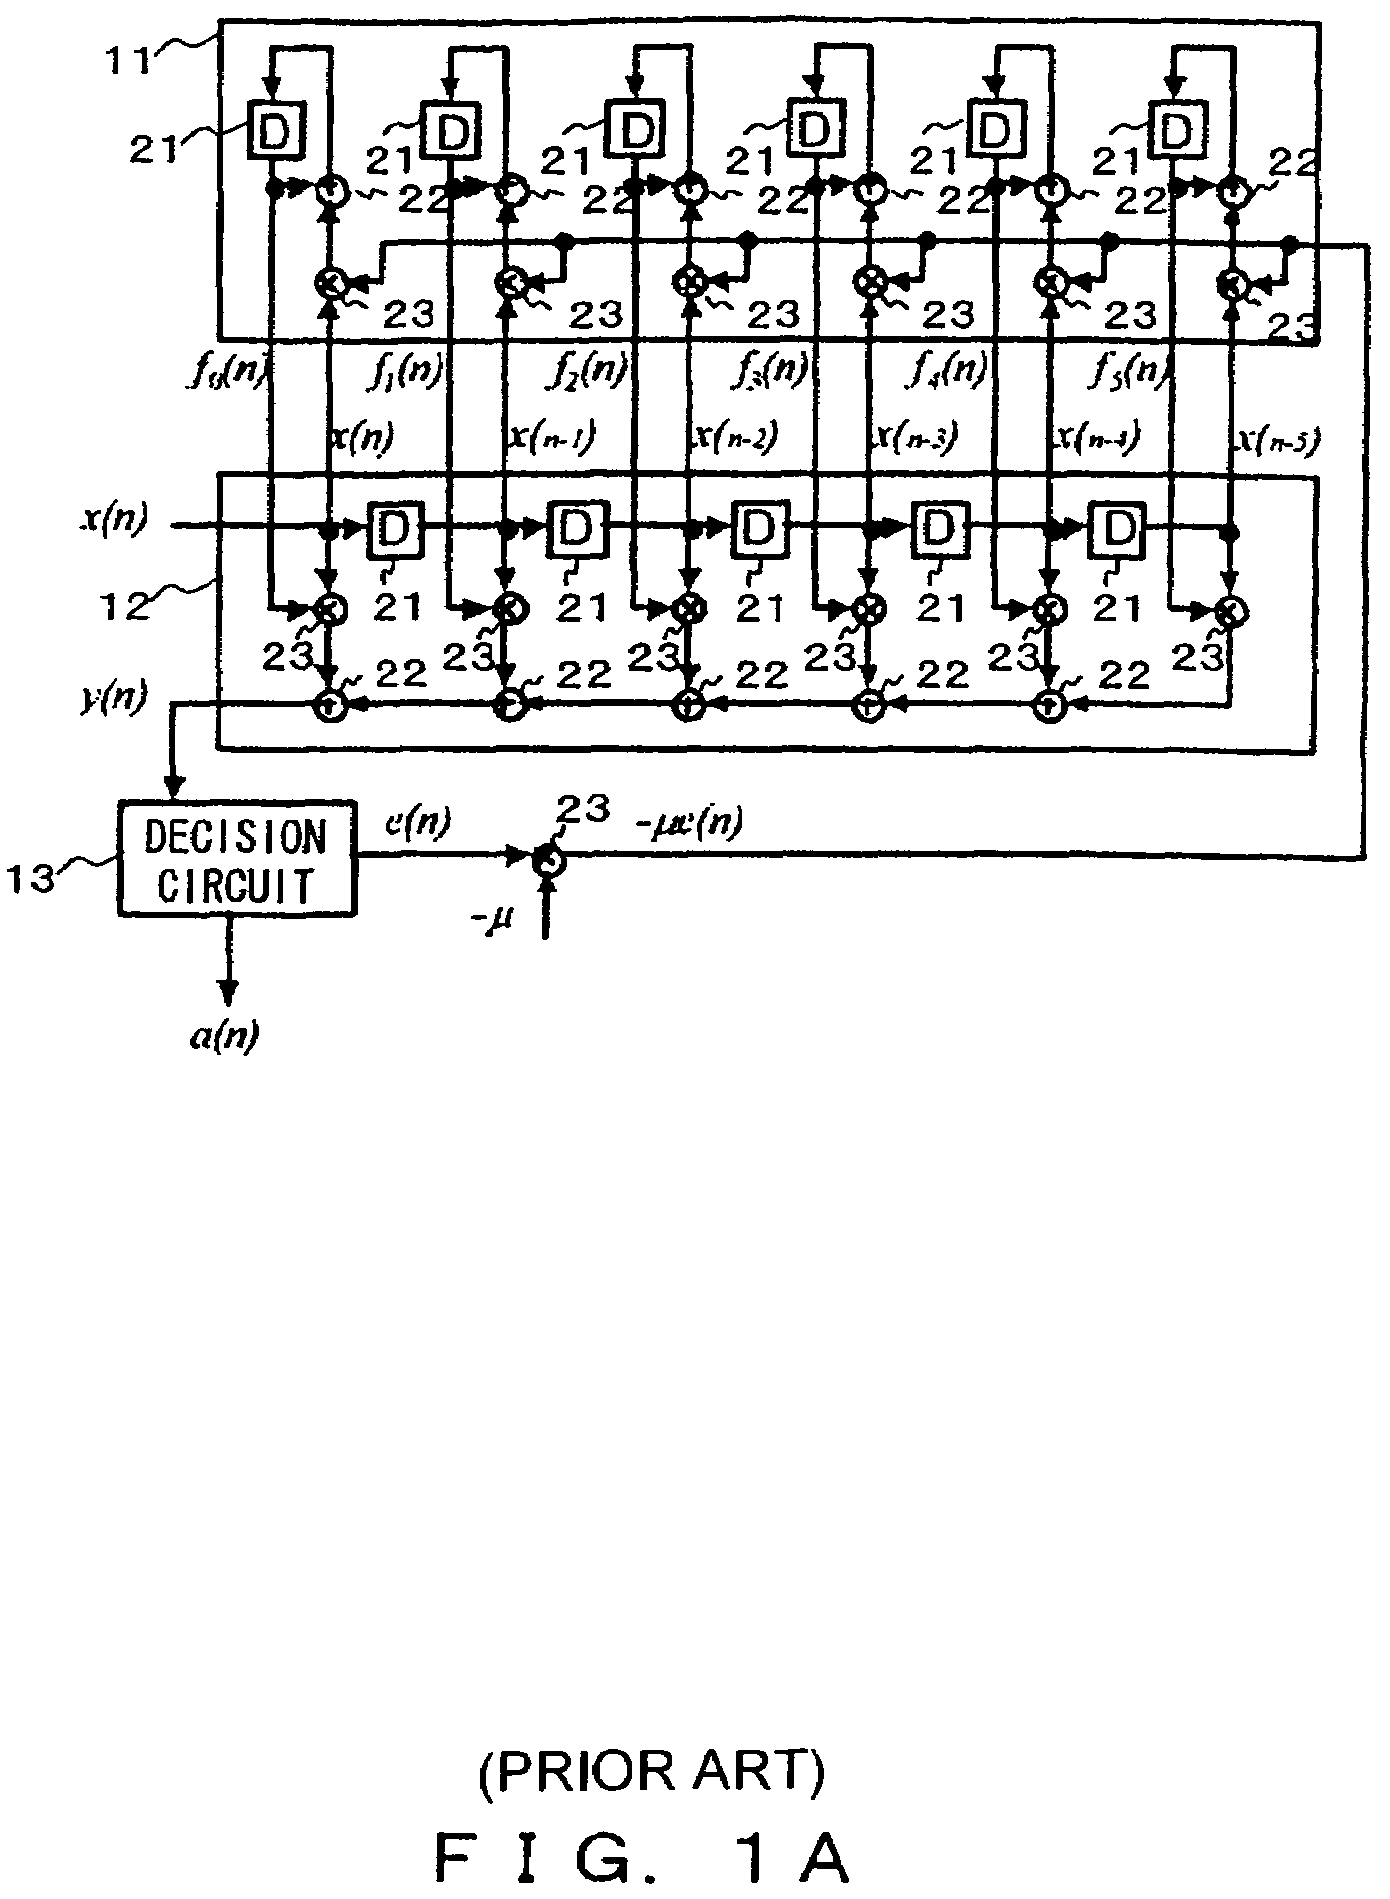 Digital filter adaptively learning filter coefficient